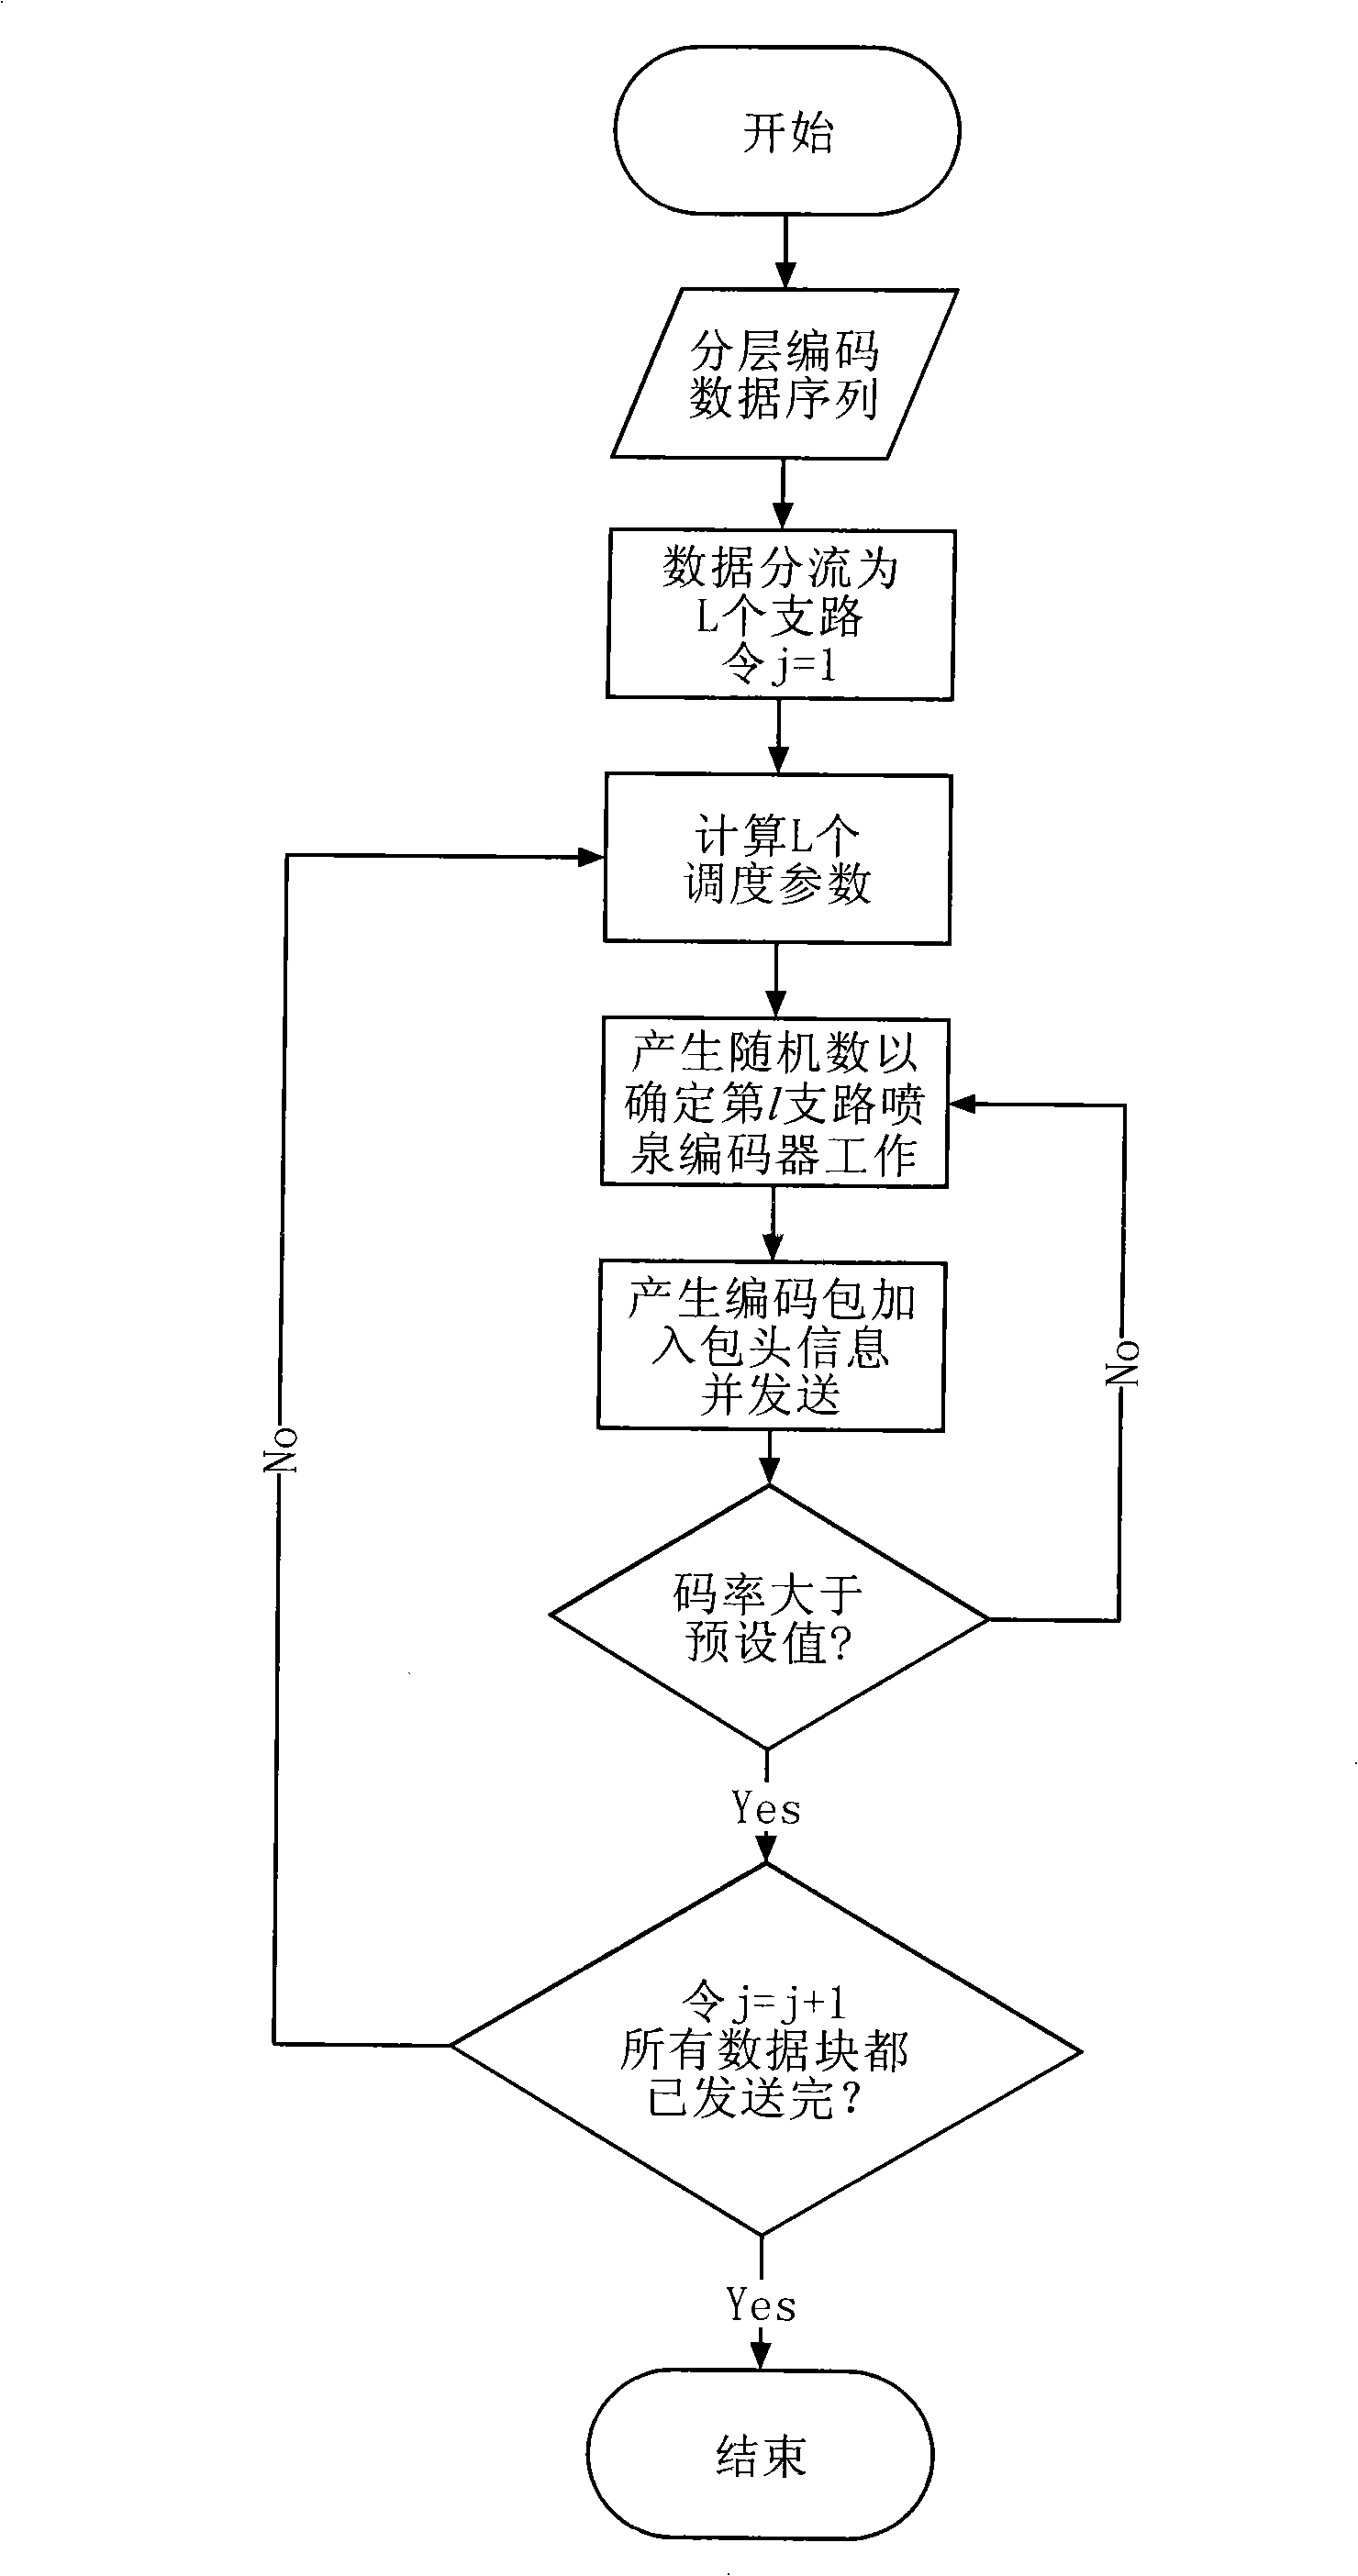 Method for distributing information based on increment fountain